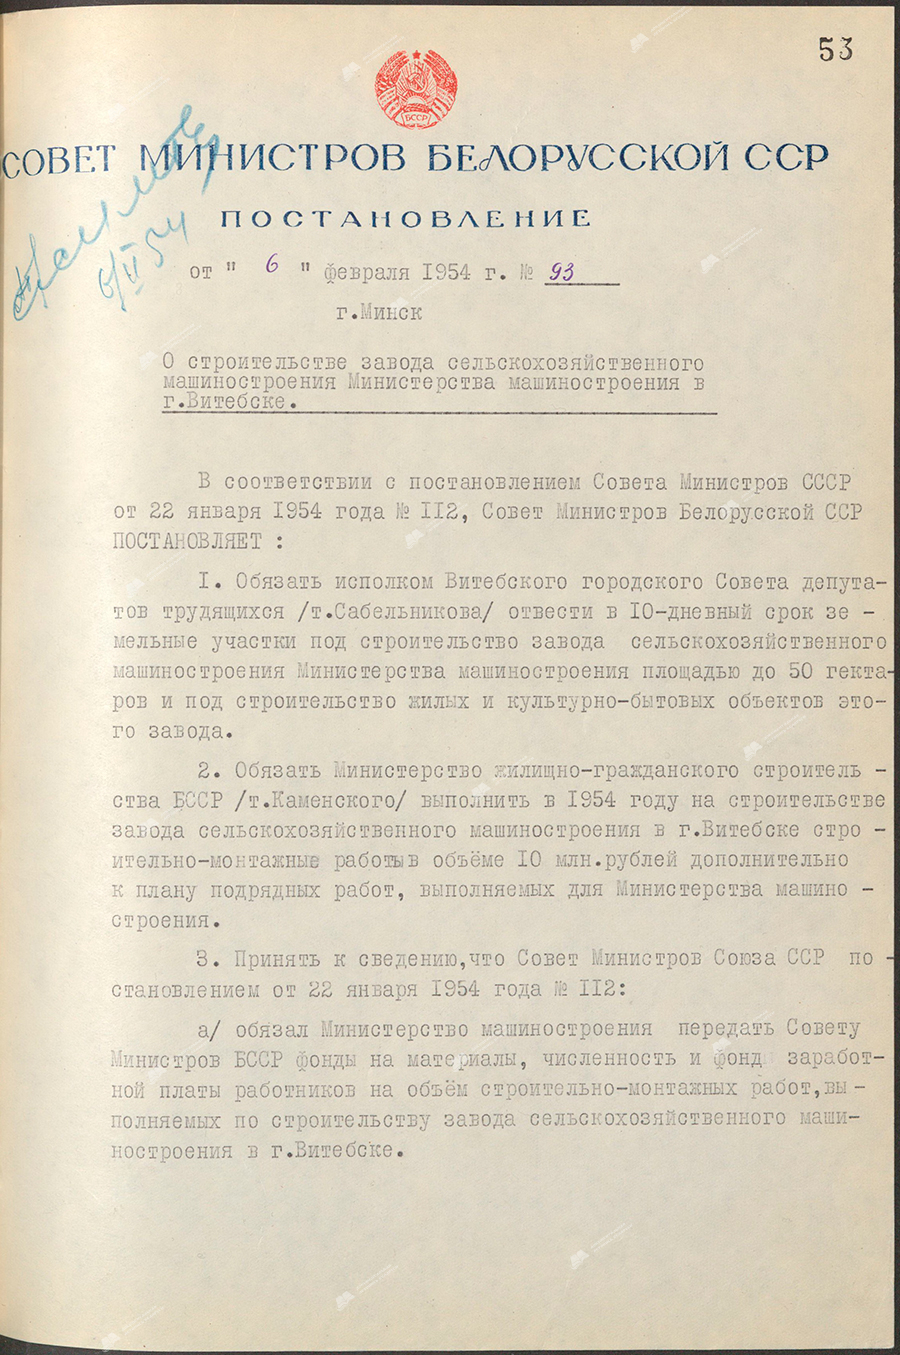 Resolution No. 93 of the Council of Ministers of the Byelorussian SSR «On the construction of an agricultural machinery plant of the Ministry of Mechanical Engineering in Vitebsk»-стр. 0